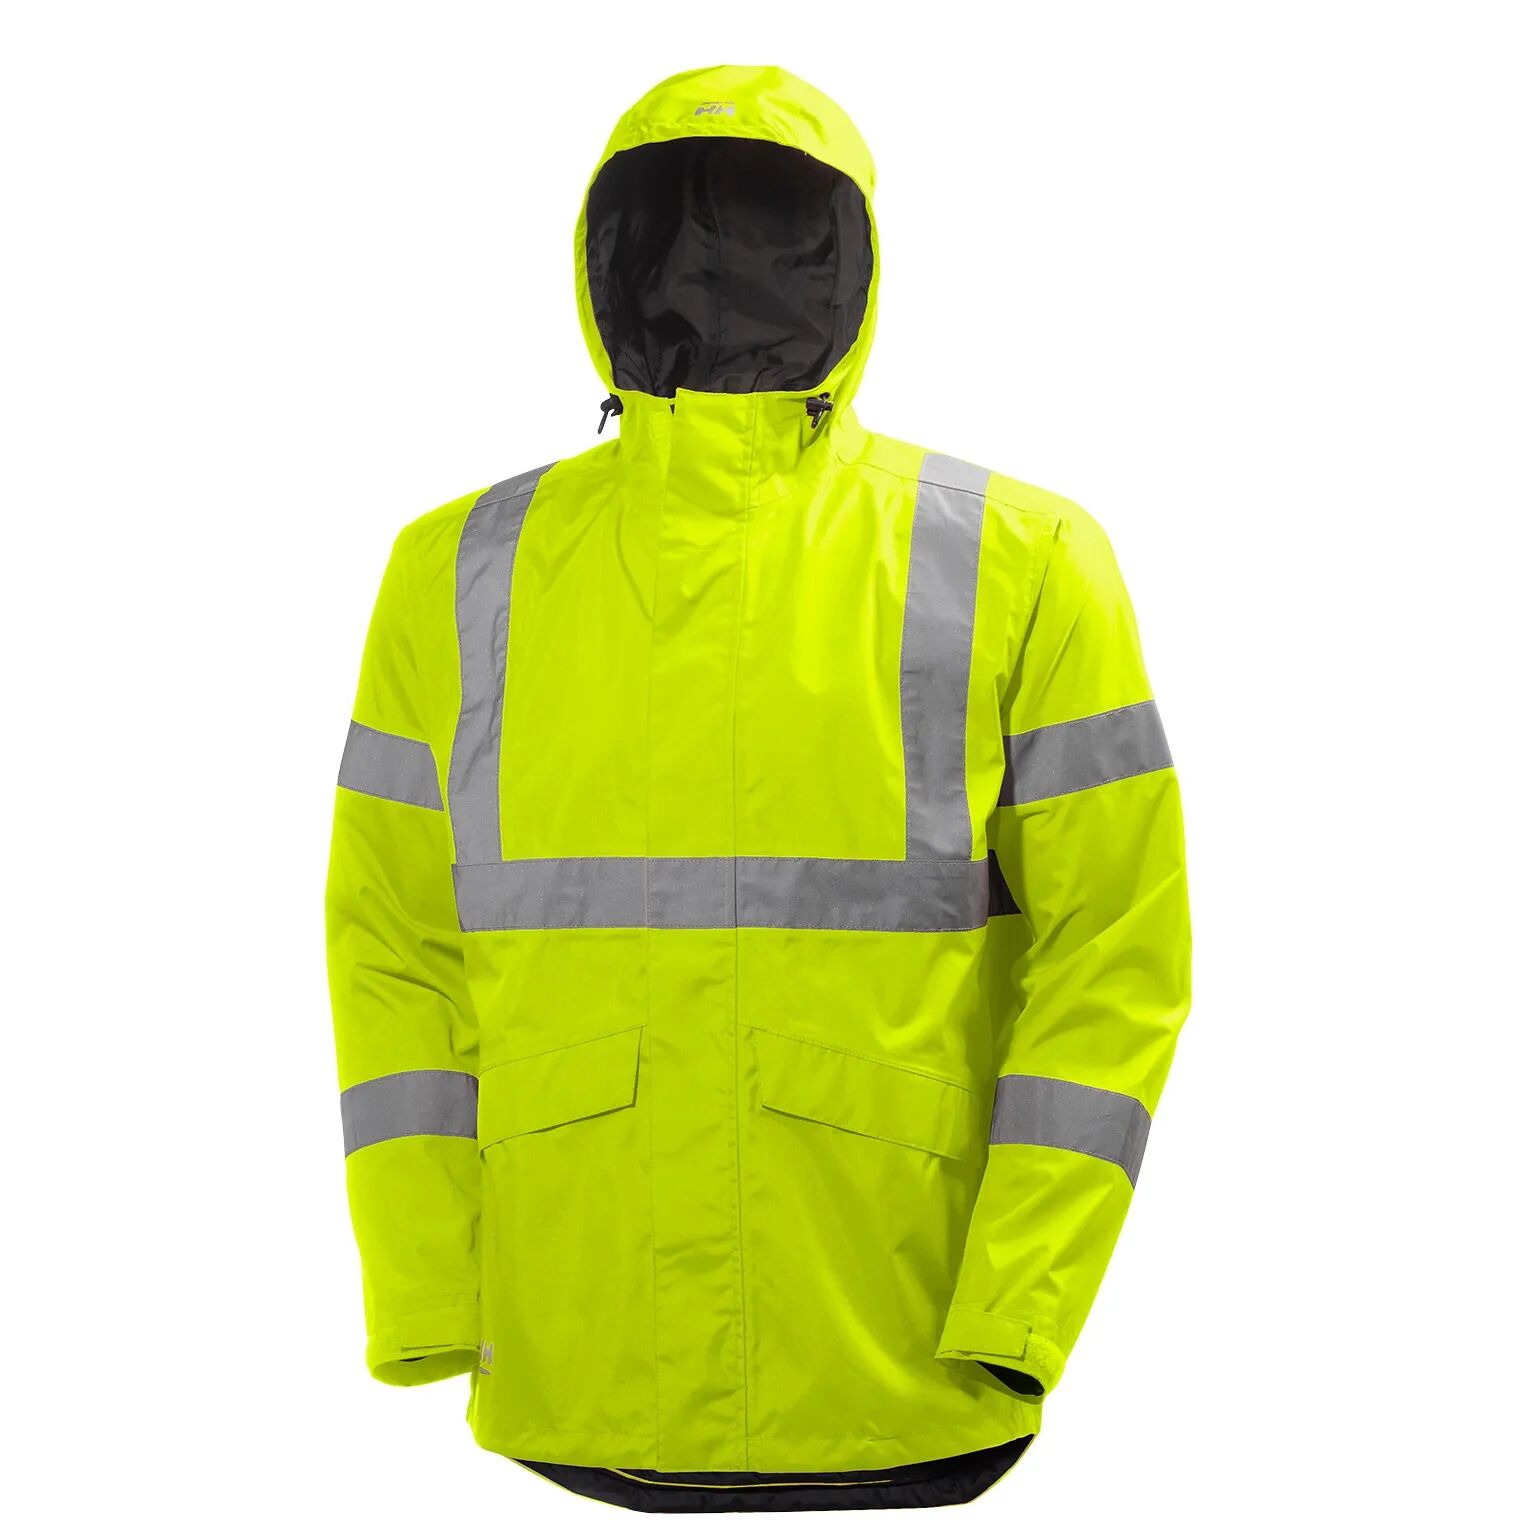 HH Workwear Helly Hansen WorkwearAlta Breathable Protective Shelter Jacket Yellow S